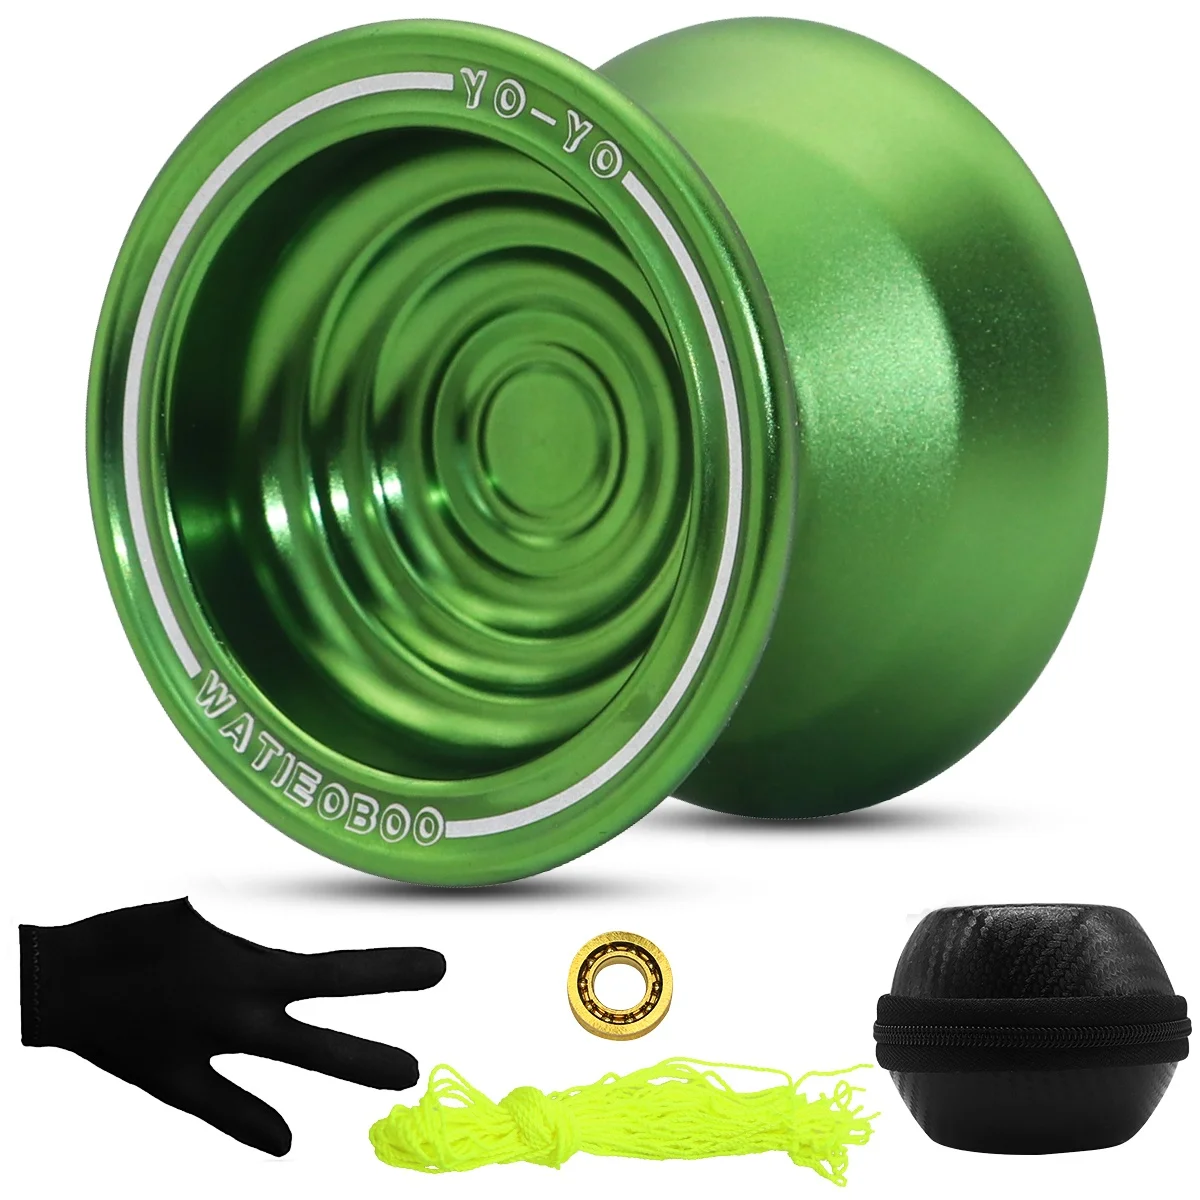 coping bypass sorg Wholesale Best Selling Metal Custom Yoyo Toy Responsive High-speed Aluminum  Alloy Yo-yo with Spinning String for Boys Girls Children Kids From  m.alibaba.com